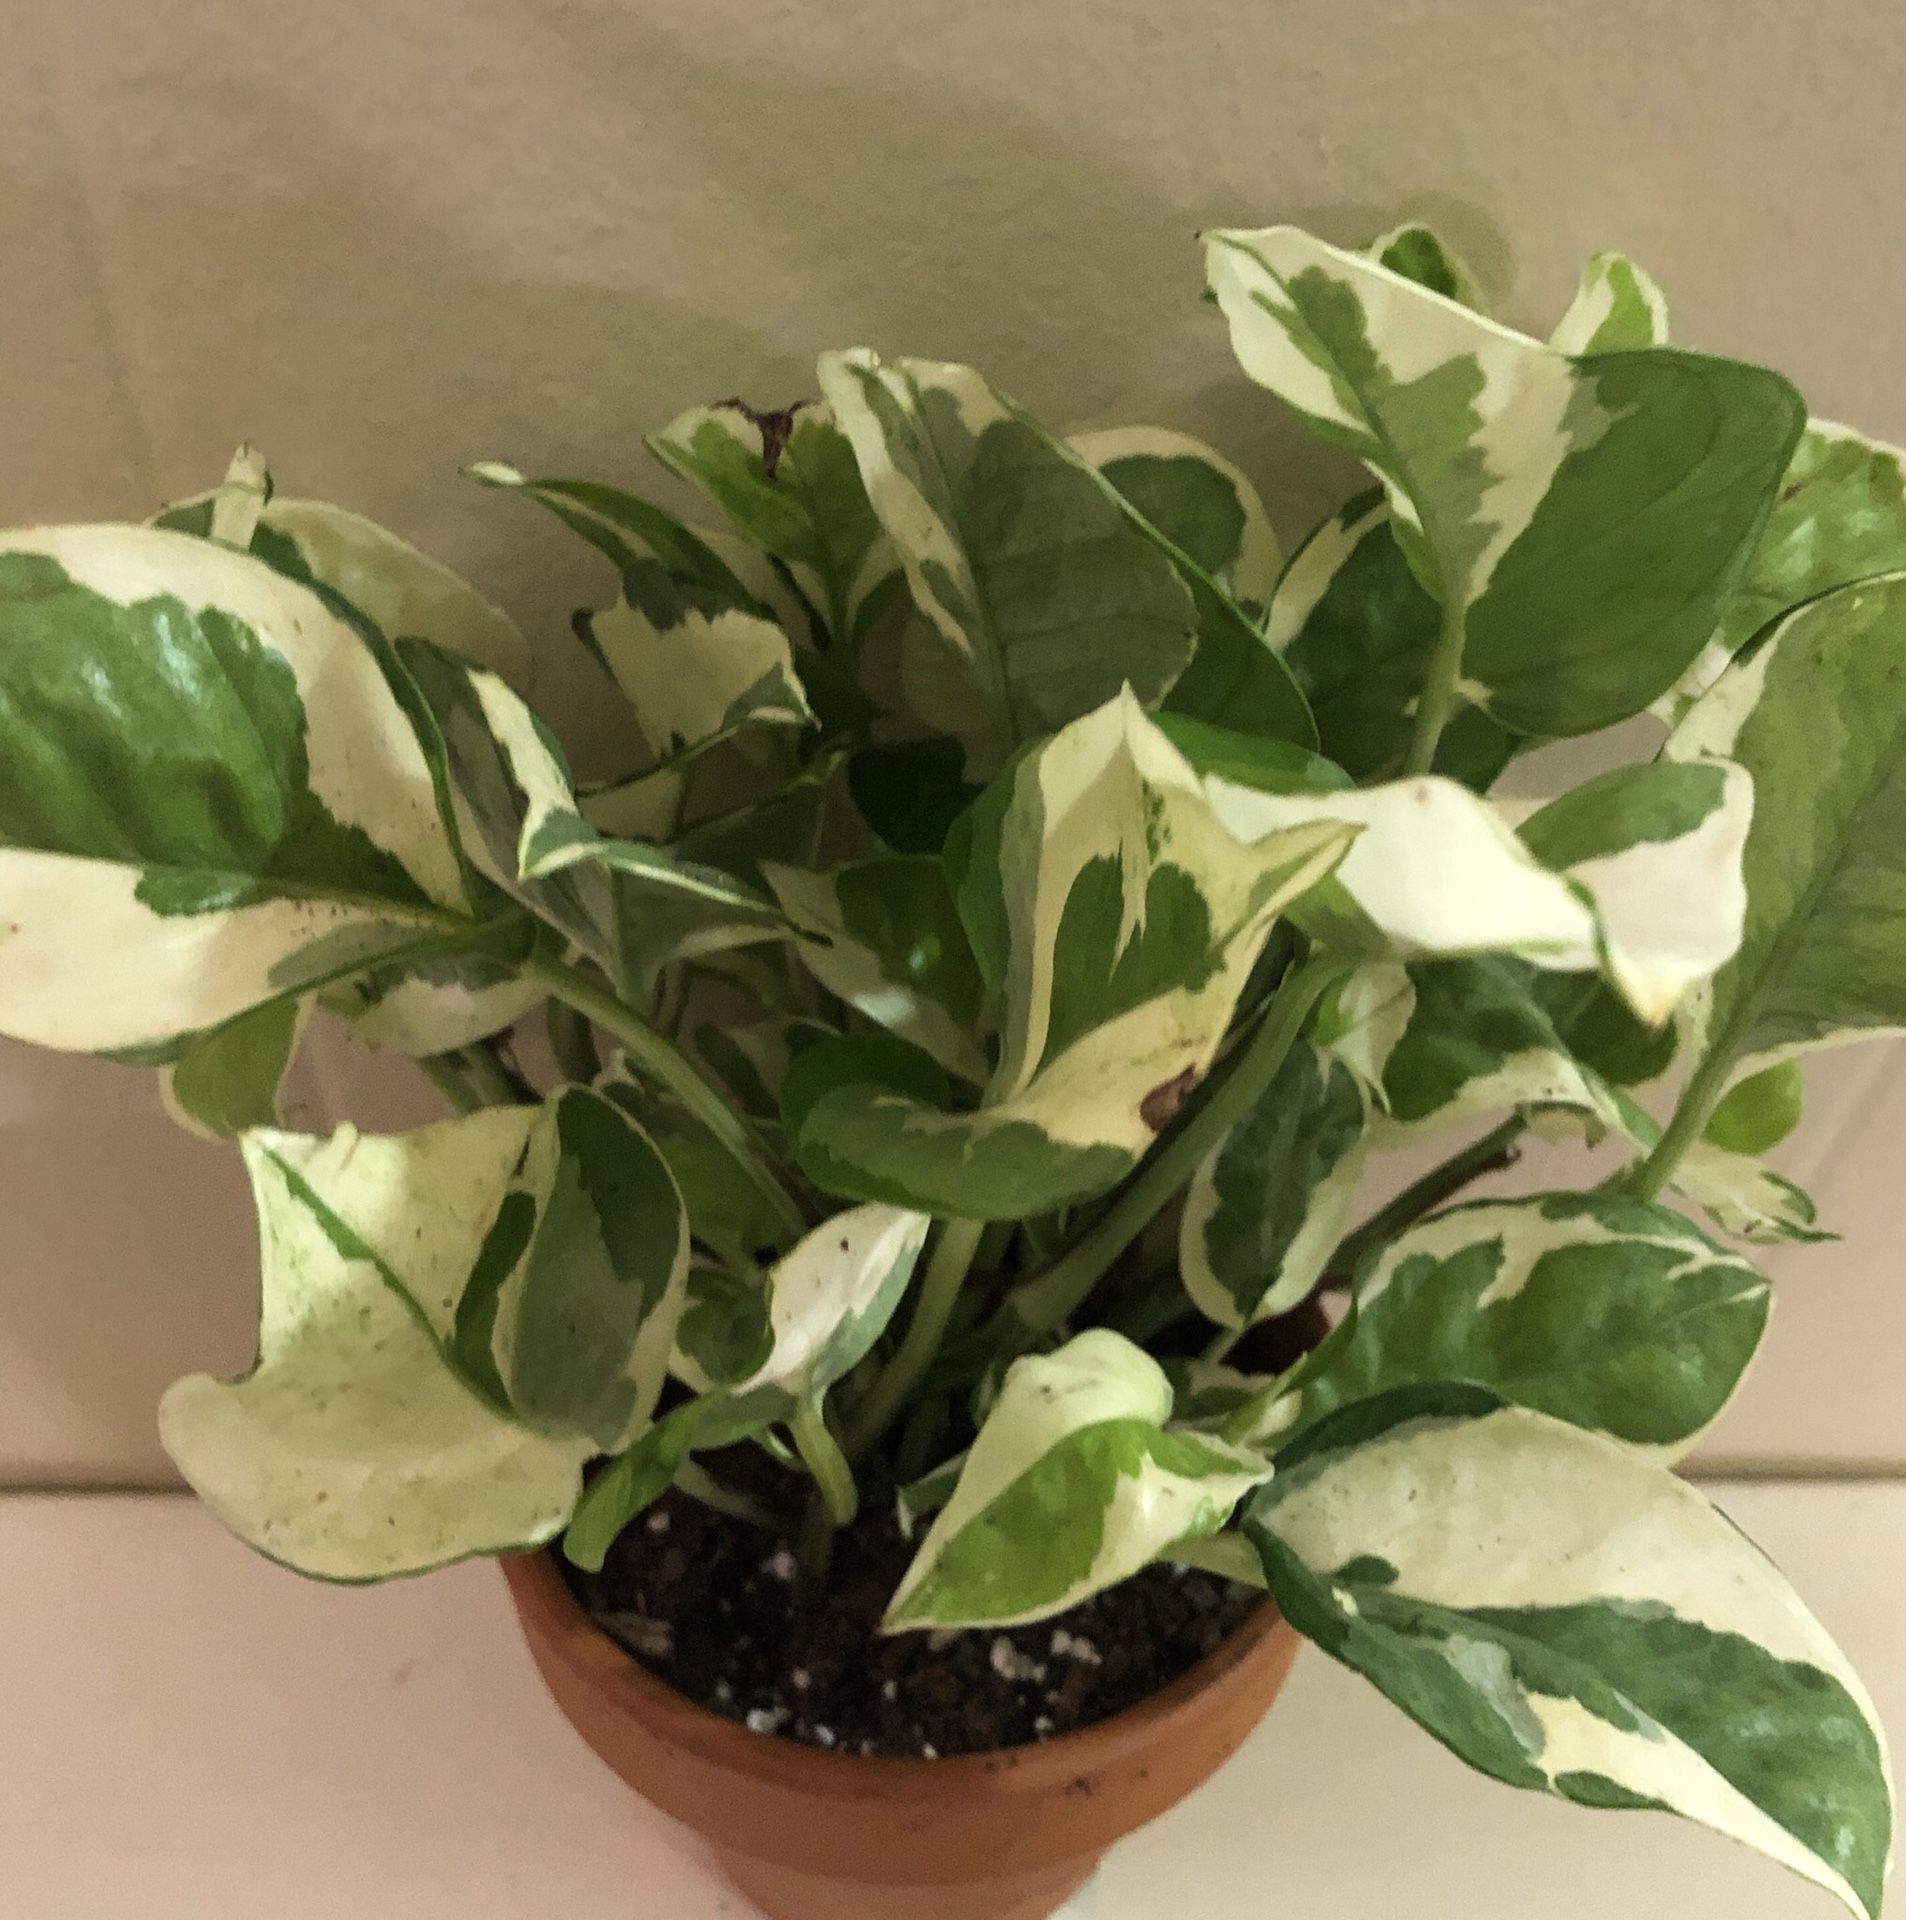 Pothos Epipremnum Aureum 'N'joy' in 4 inch pot Lush and beautiful Tropical Vining Variegated House Plant Similar to Pearls and Jade Lush Vining